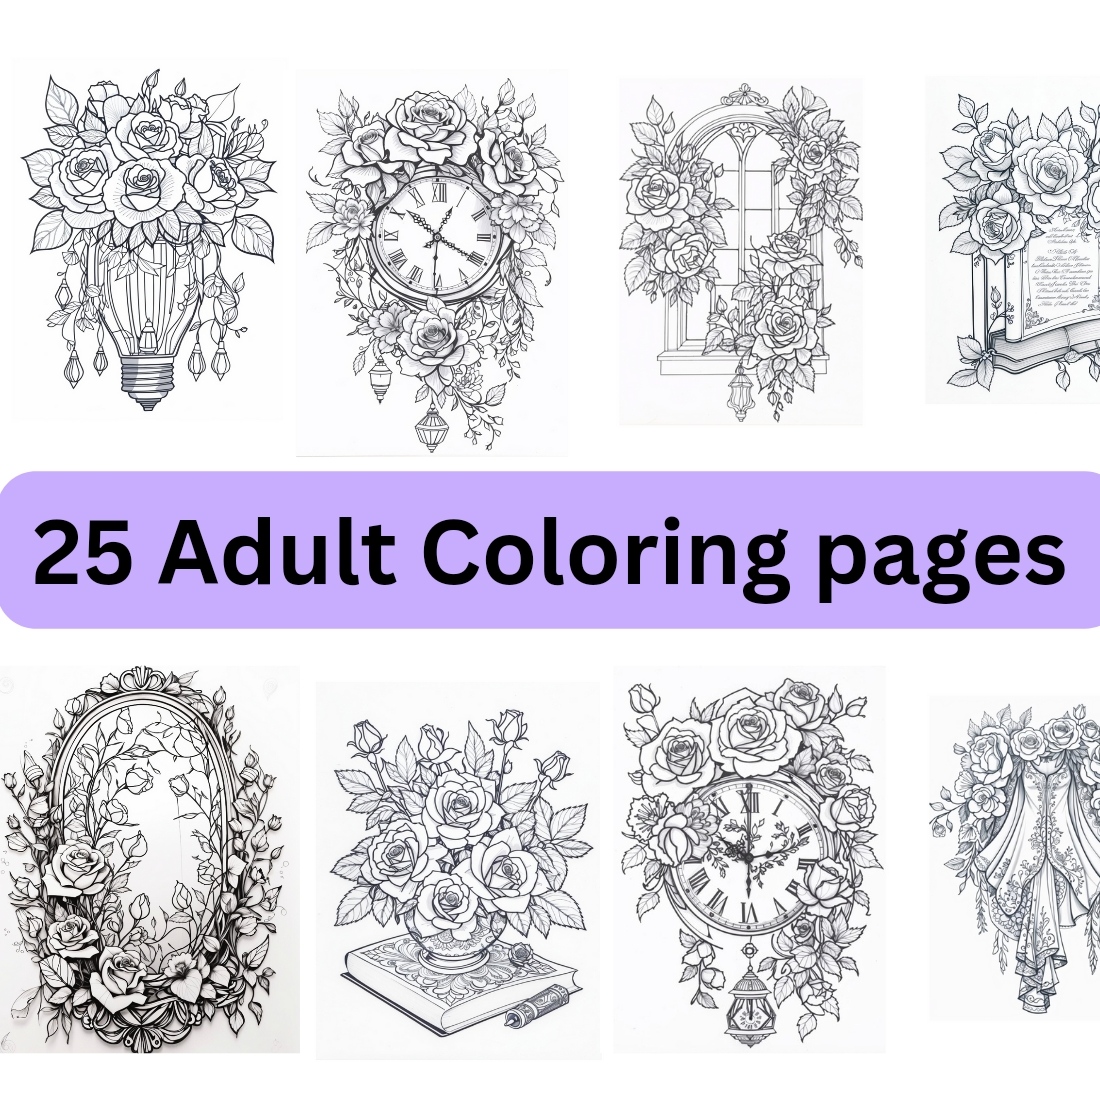 25 Printable Rose Designs Adult Coloring pages | Coloring Pages for adults cover image.